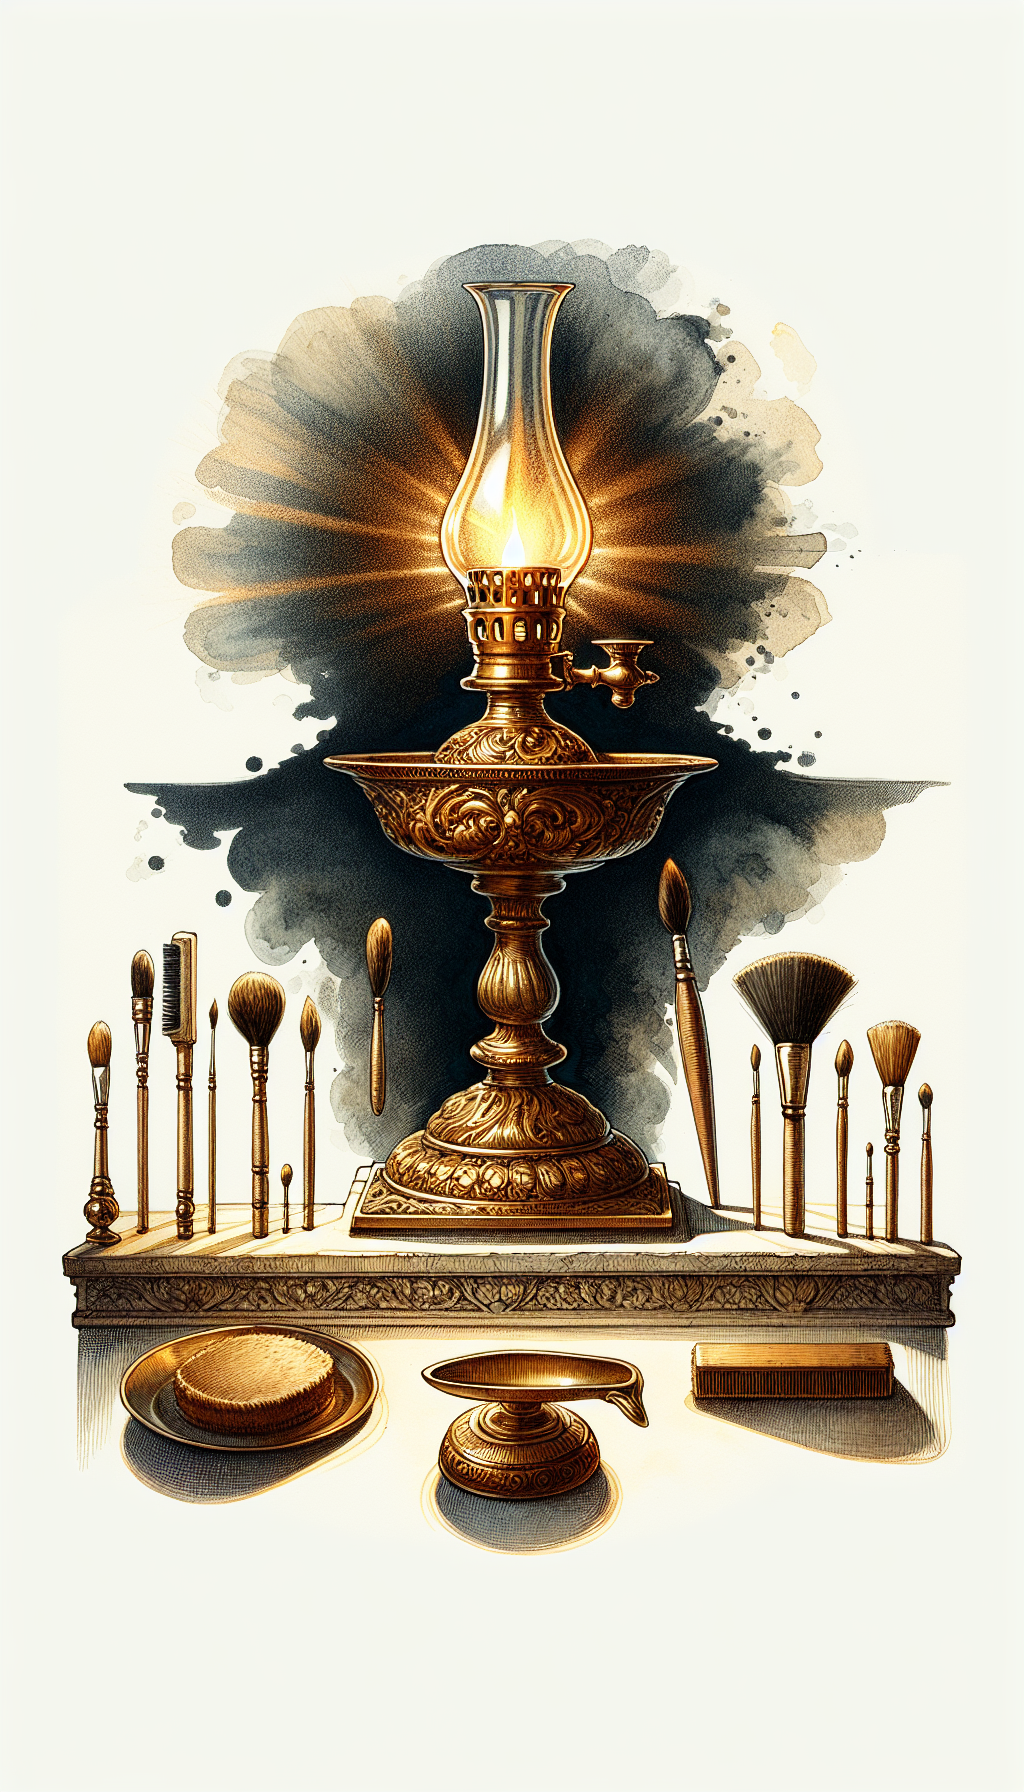 An intricate, golden antique oil lamp sits atop an ornate pedestal, its glow casting a warm light over a variety of maintenance tools—fine brushes, a soft cloth, and gentle cleansers—arranged in an arc below. The lamp shines brilliantly against a shadowy backdrop, symbolizing its elevated value through meticulous preservation, portrayed in a mix of watercolor splashes and sharp, detailed line art.